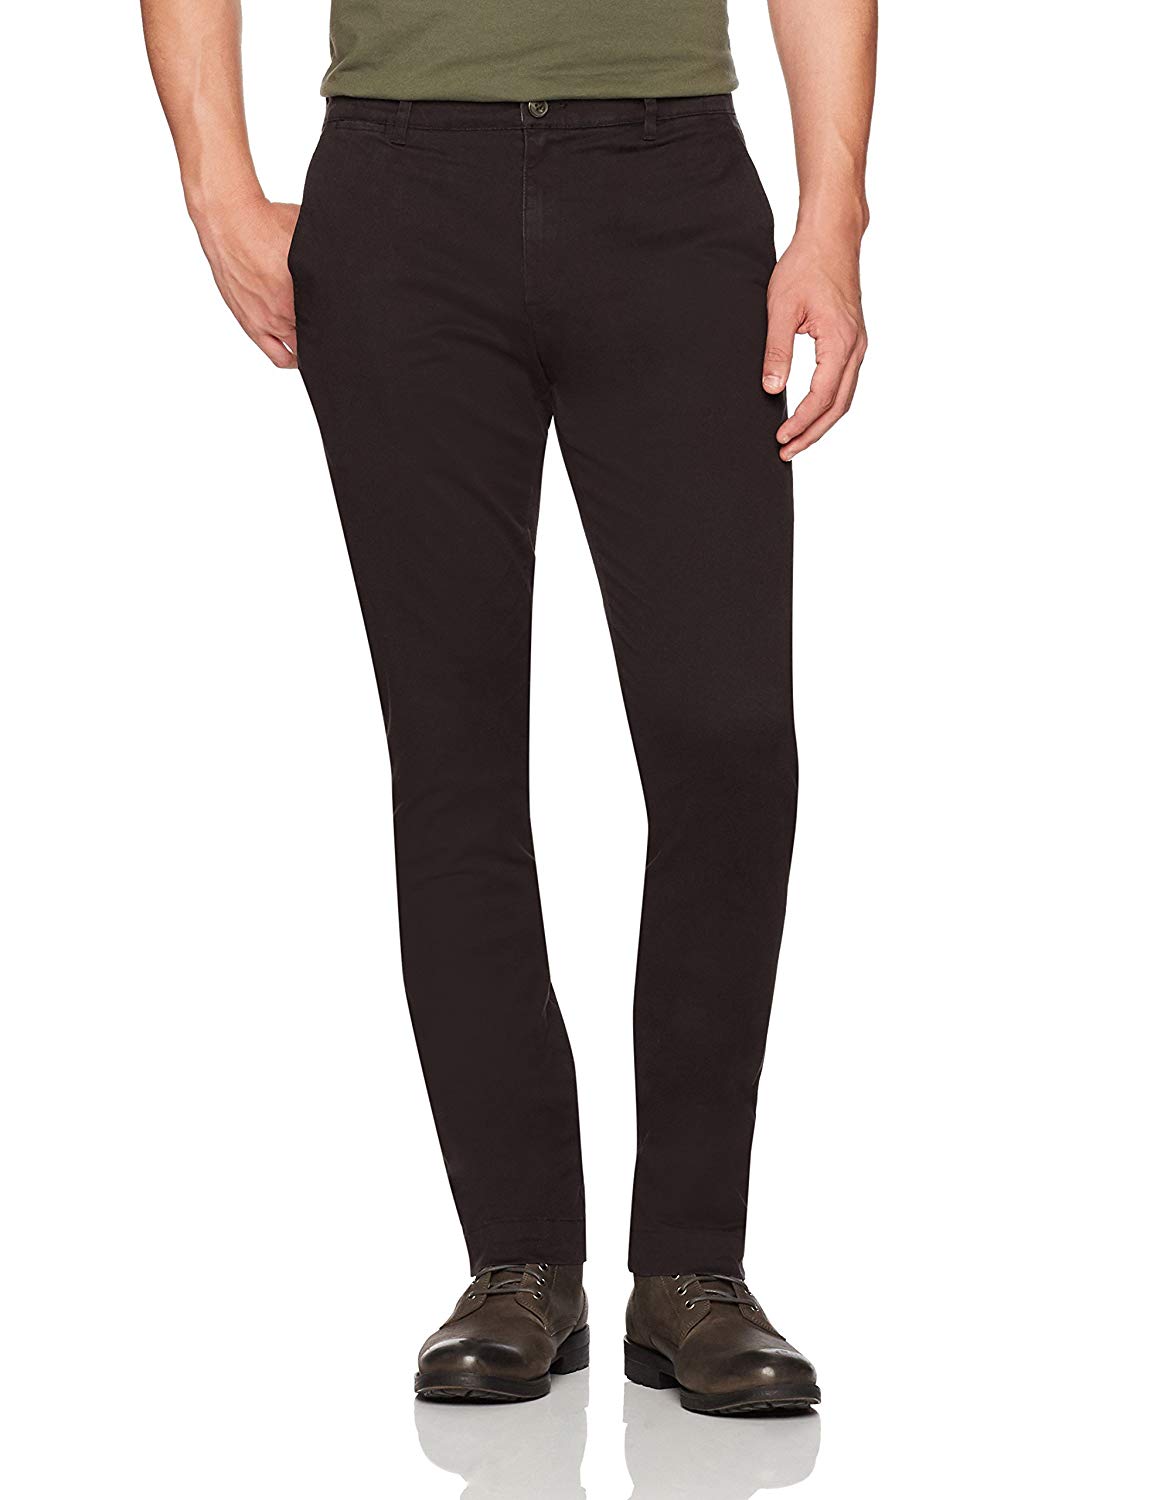 Goodthreads Men's Slim-Fit Washed Stretch Chino Pant,, Black, Size 30W ...